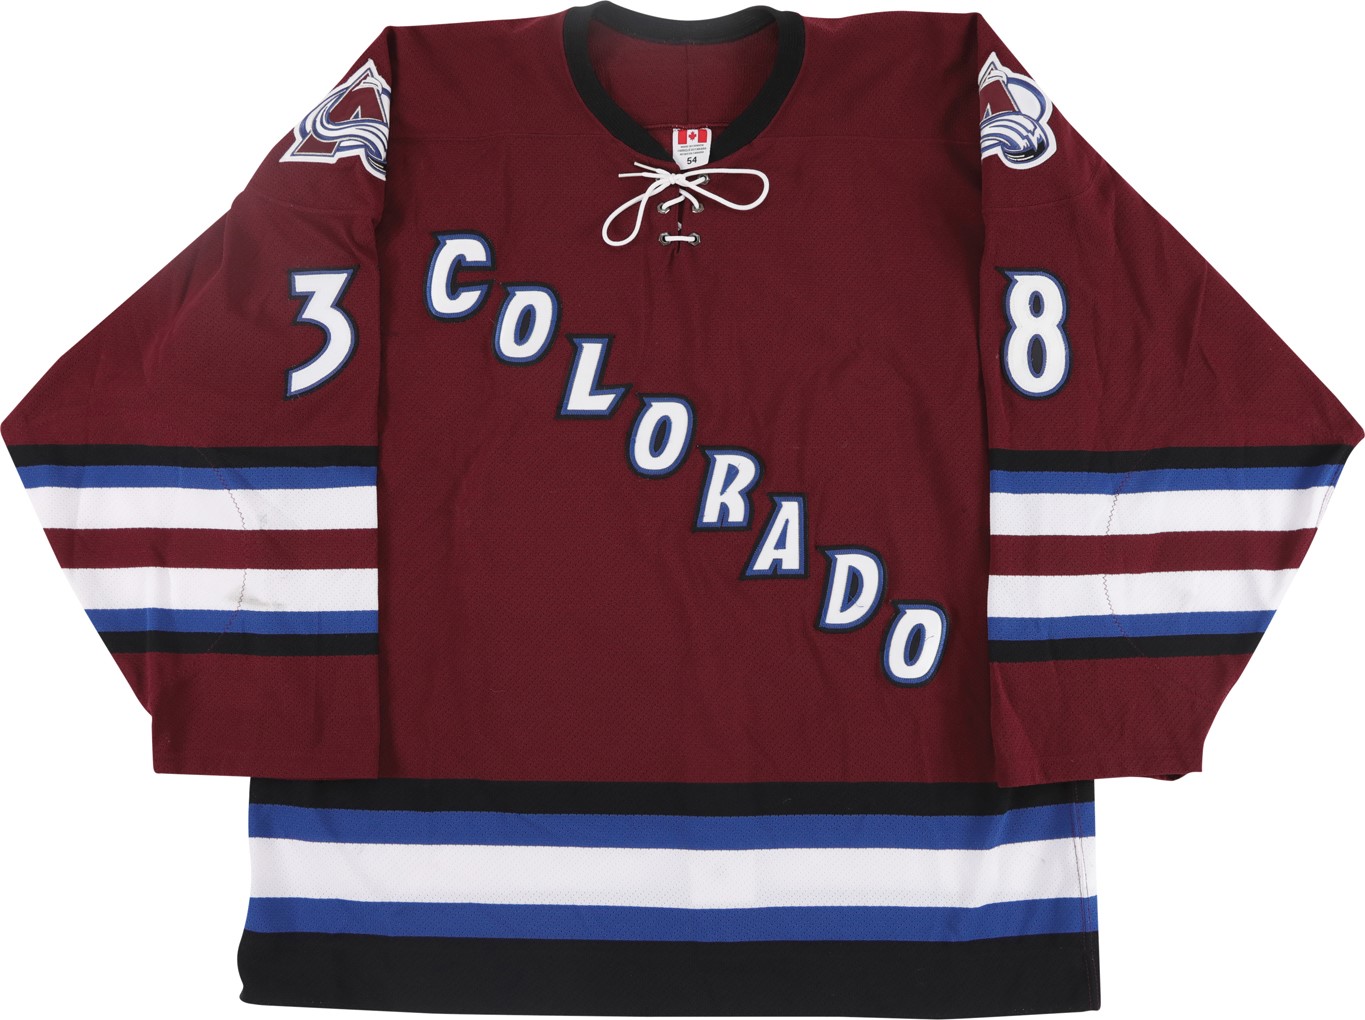 - 2004 Matthew Barnaby Colorado Avalanche Game Worn "Goal" Jersey - Rare Alternate Style! (Photo-Matched & MeiGray)